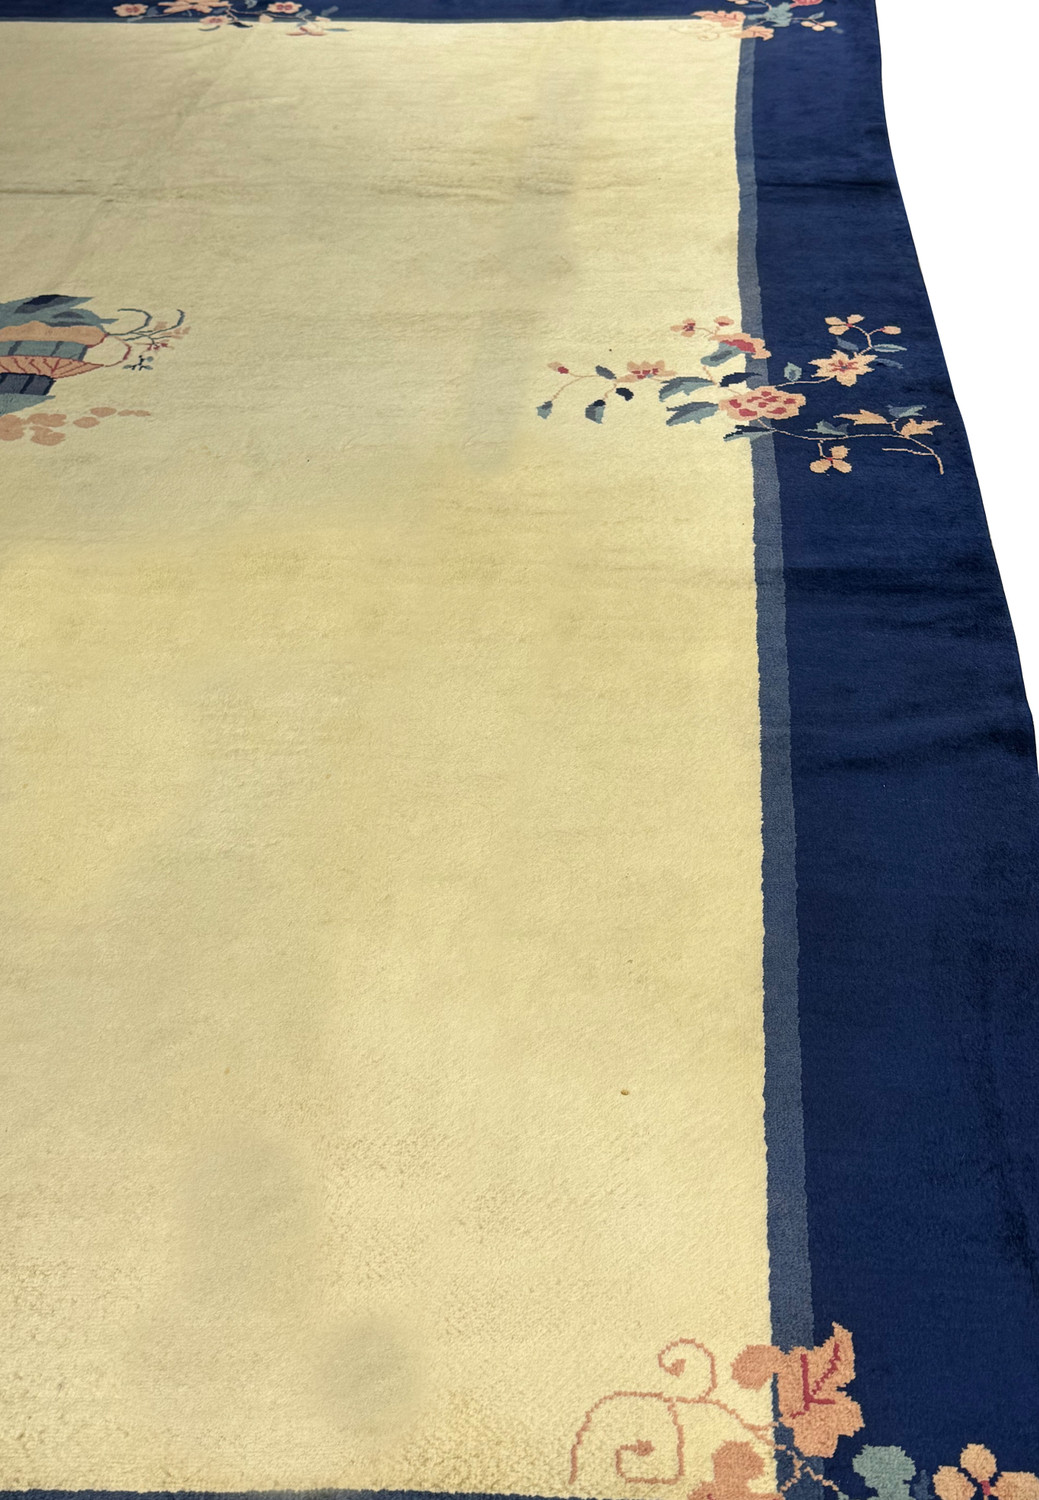 Close-up of a portion of the vintage Art Deco rug, focusing on the navy blue border with intricately designed flowers and leaves